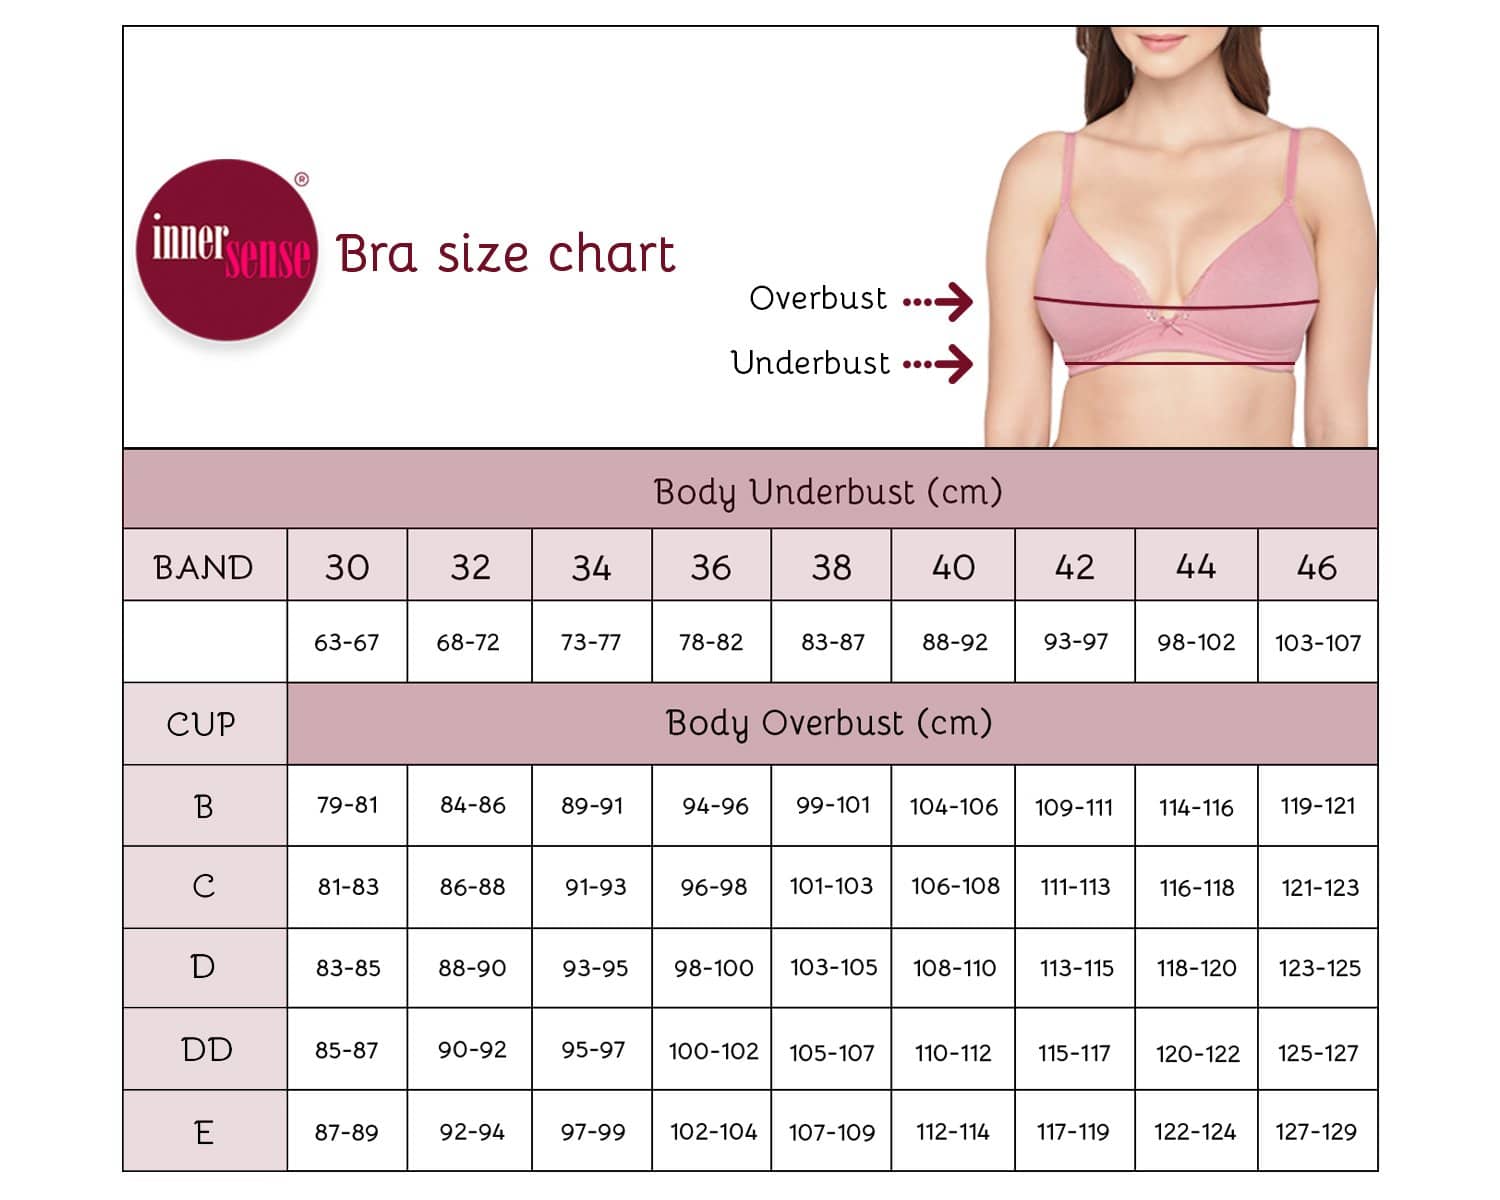 Cotton Net Pink Padded bra Panty set at Rs 119/set in New Delhi